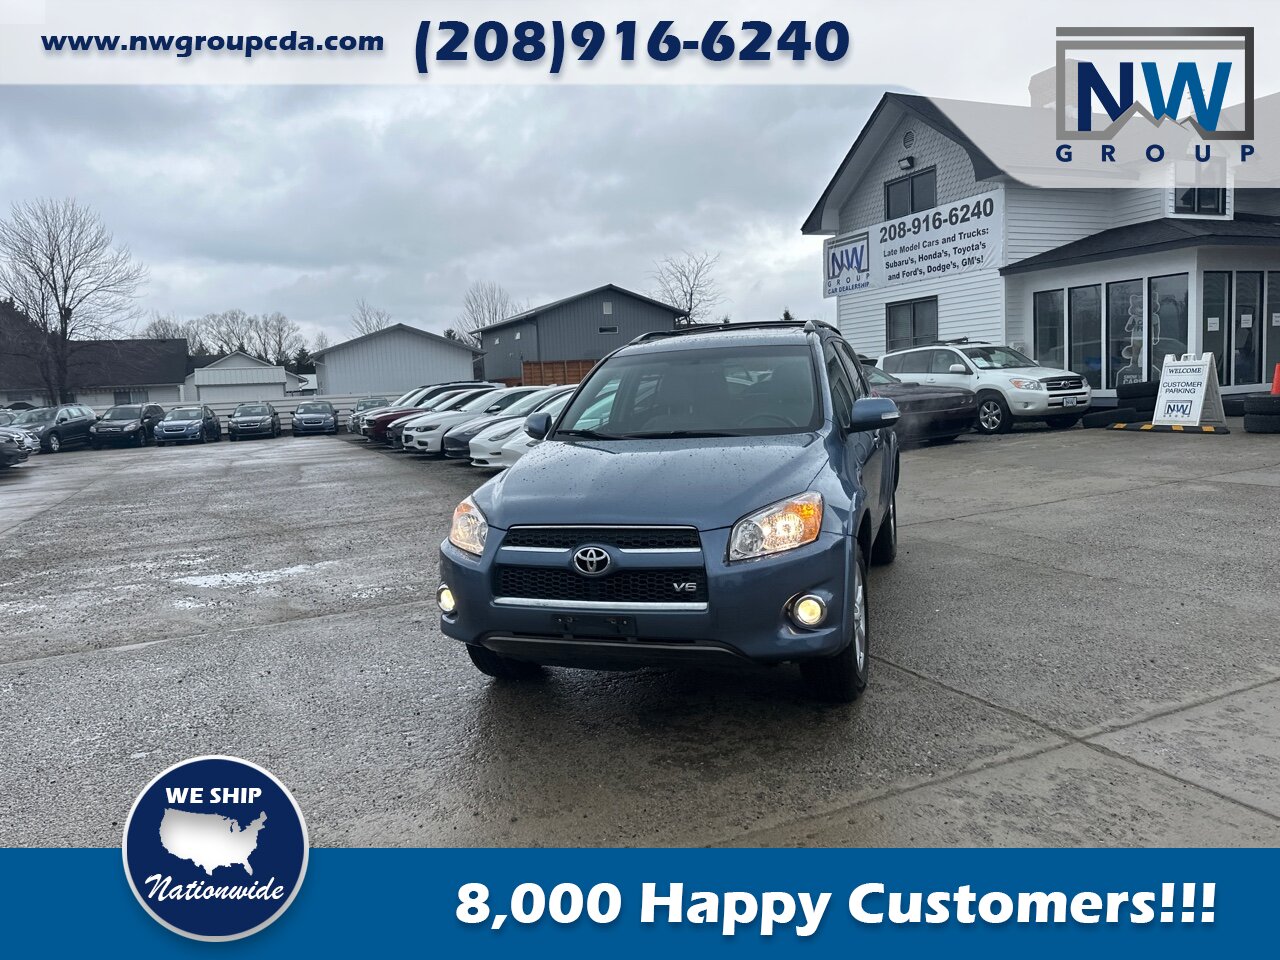 2011 Toyota RAV4 Limited V6.  Low Miles, 4WD, Great Model Year! - Photo 3 - Post Falls, ID 83854